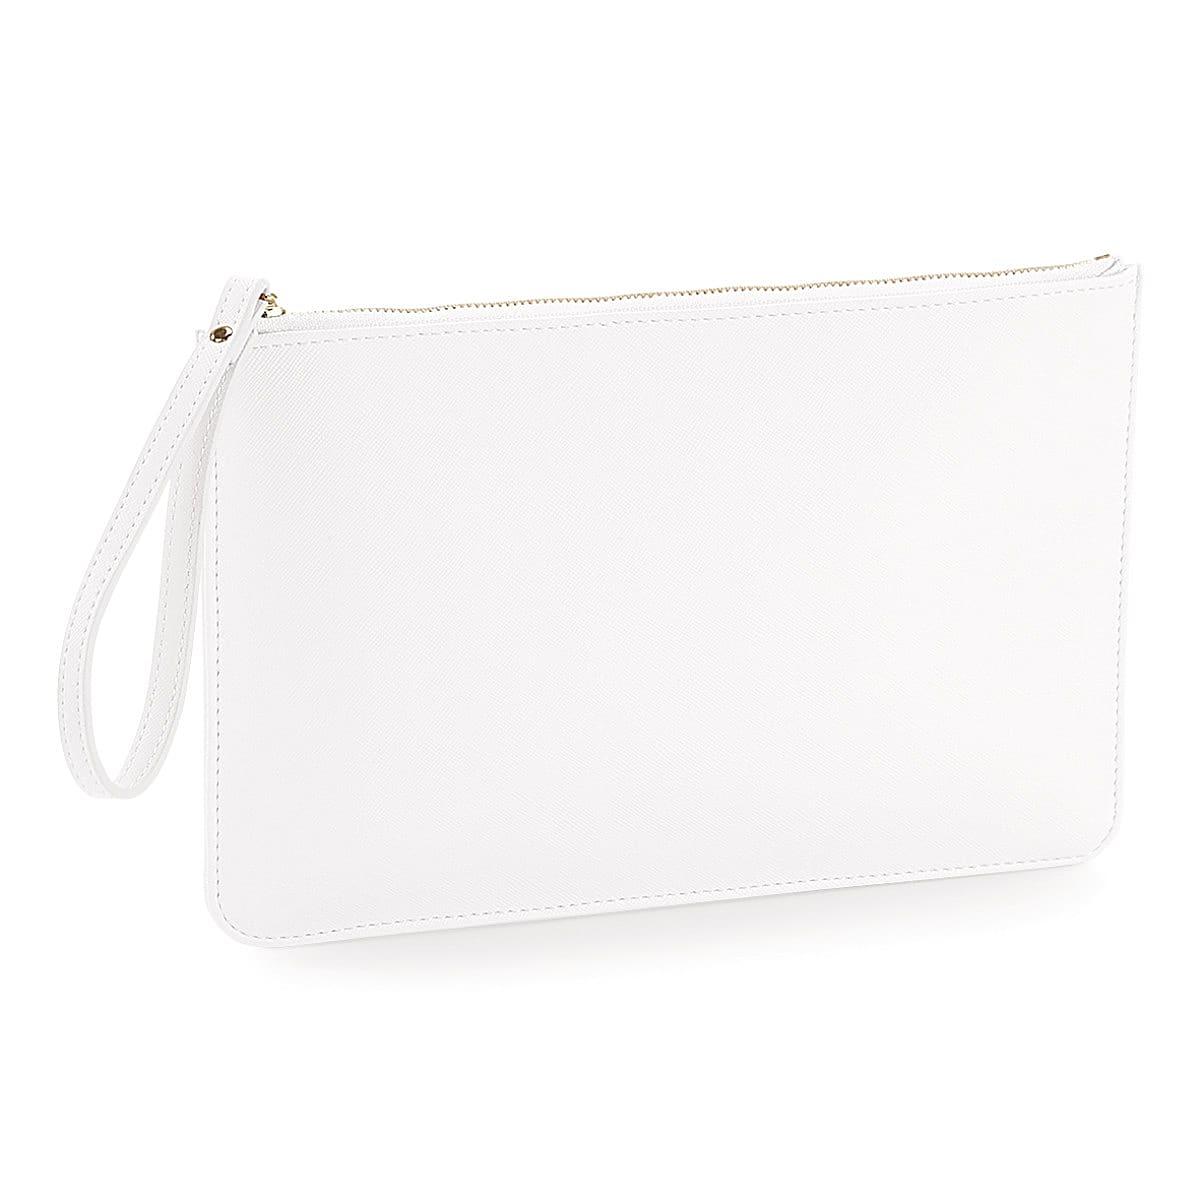 Bagbase Boutique Accessory Pouch in Soft White (Product Code: BG750)